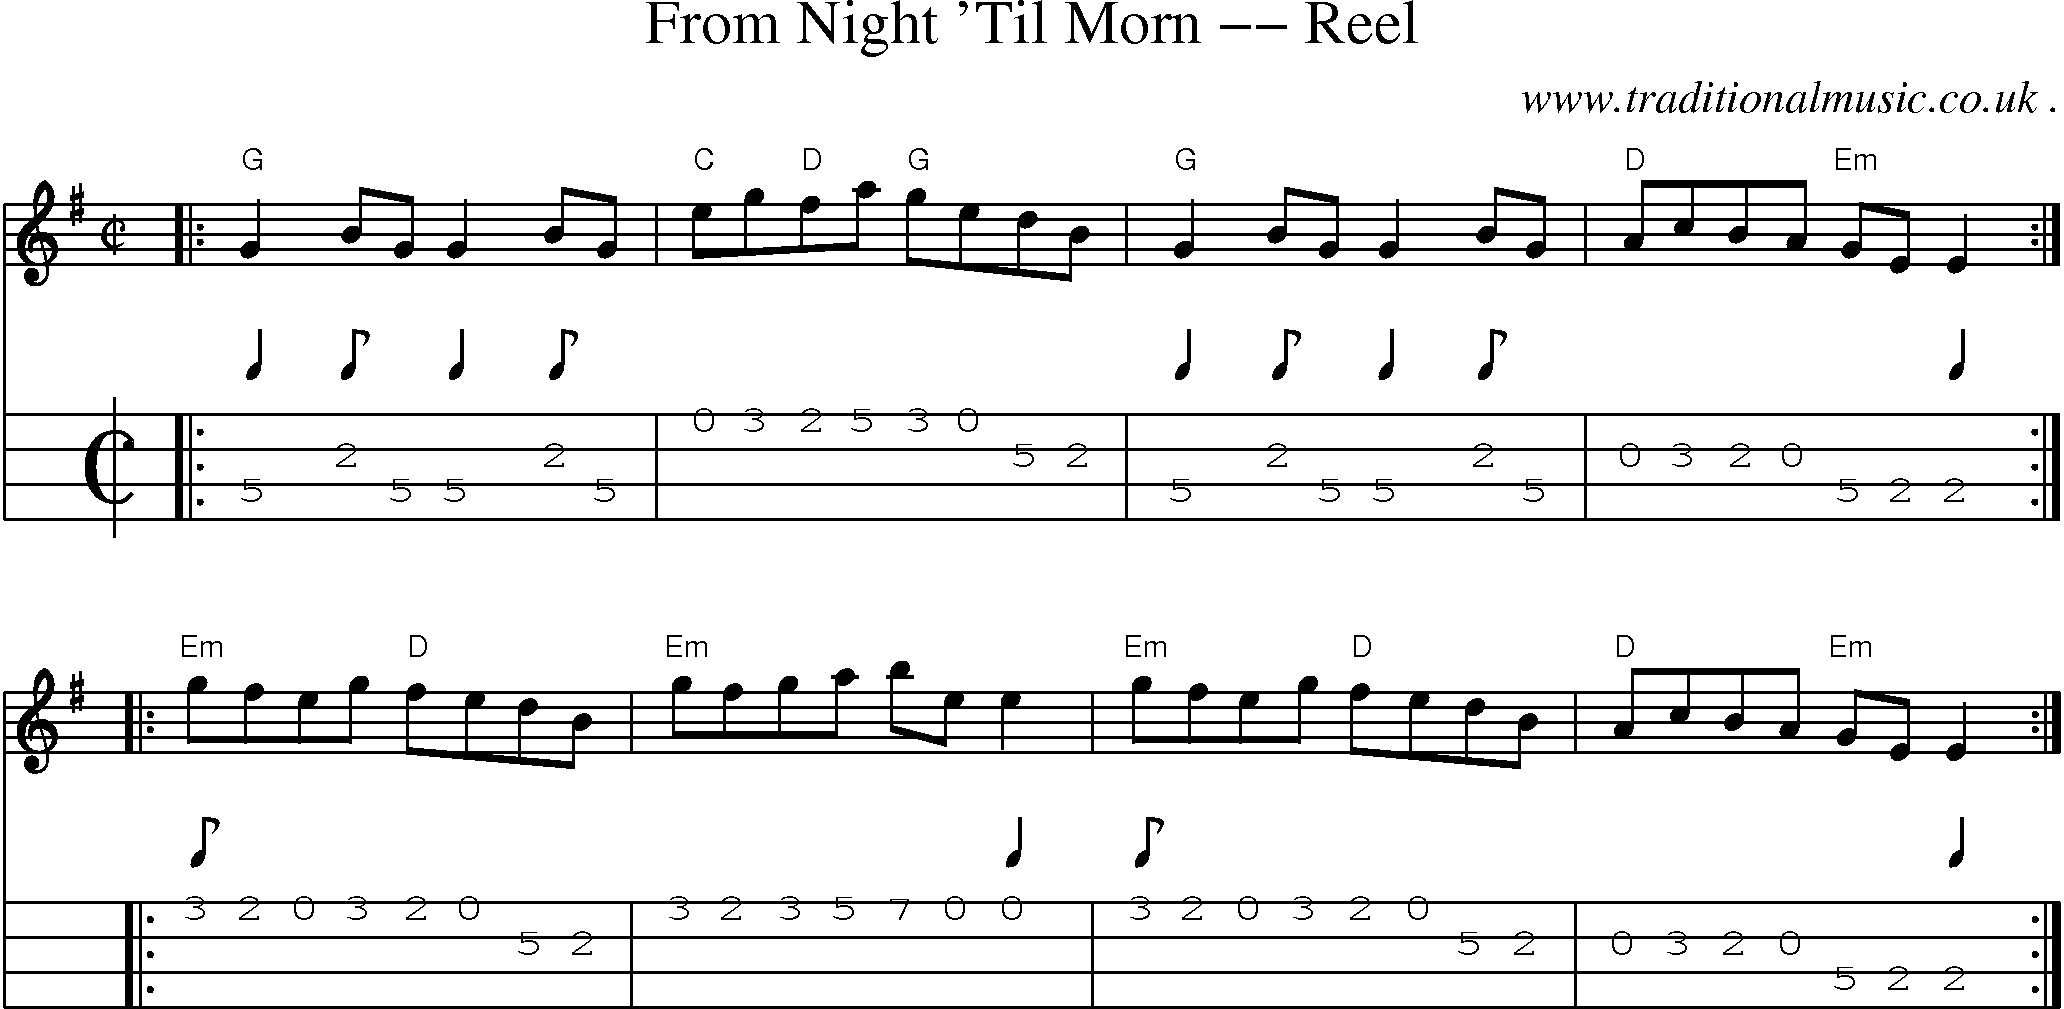 Sheet-music  score, Chords and Mandolin Tabs for From Night Til Morn -- Reel